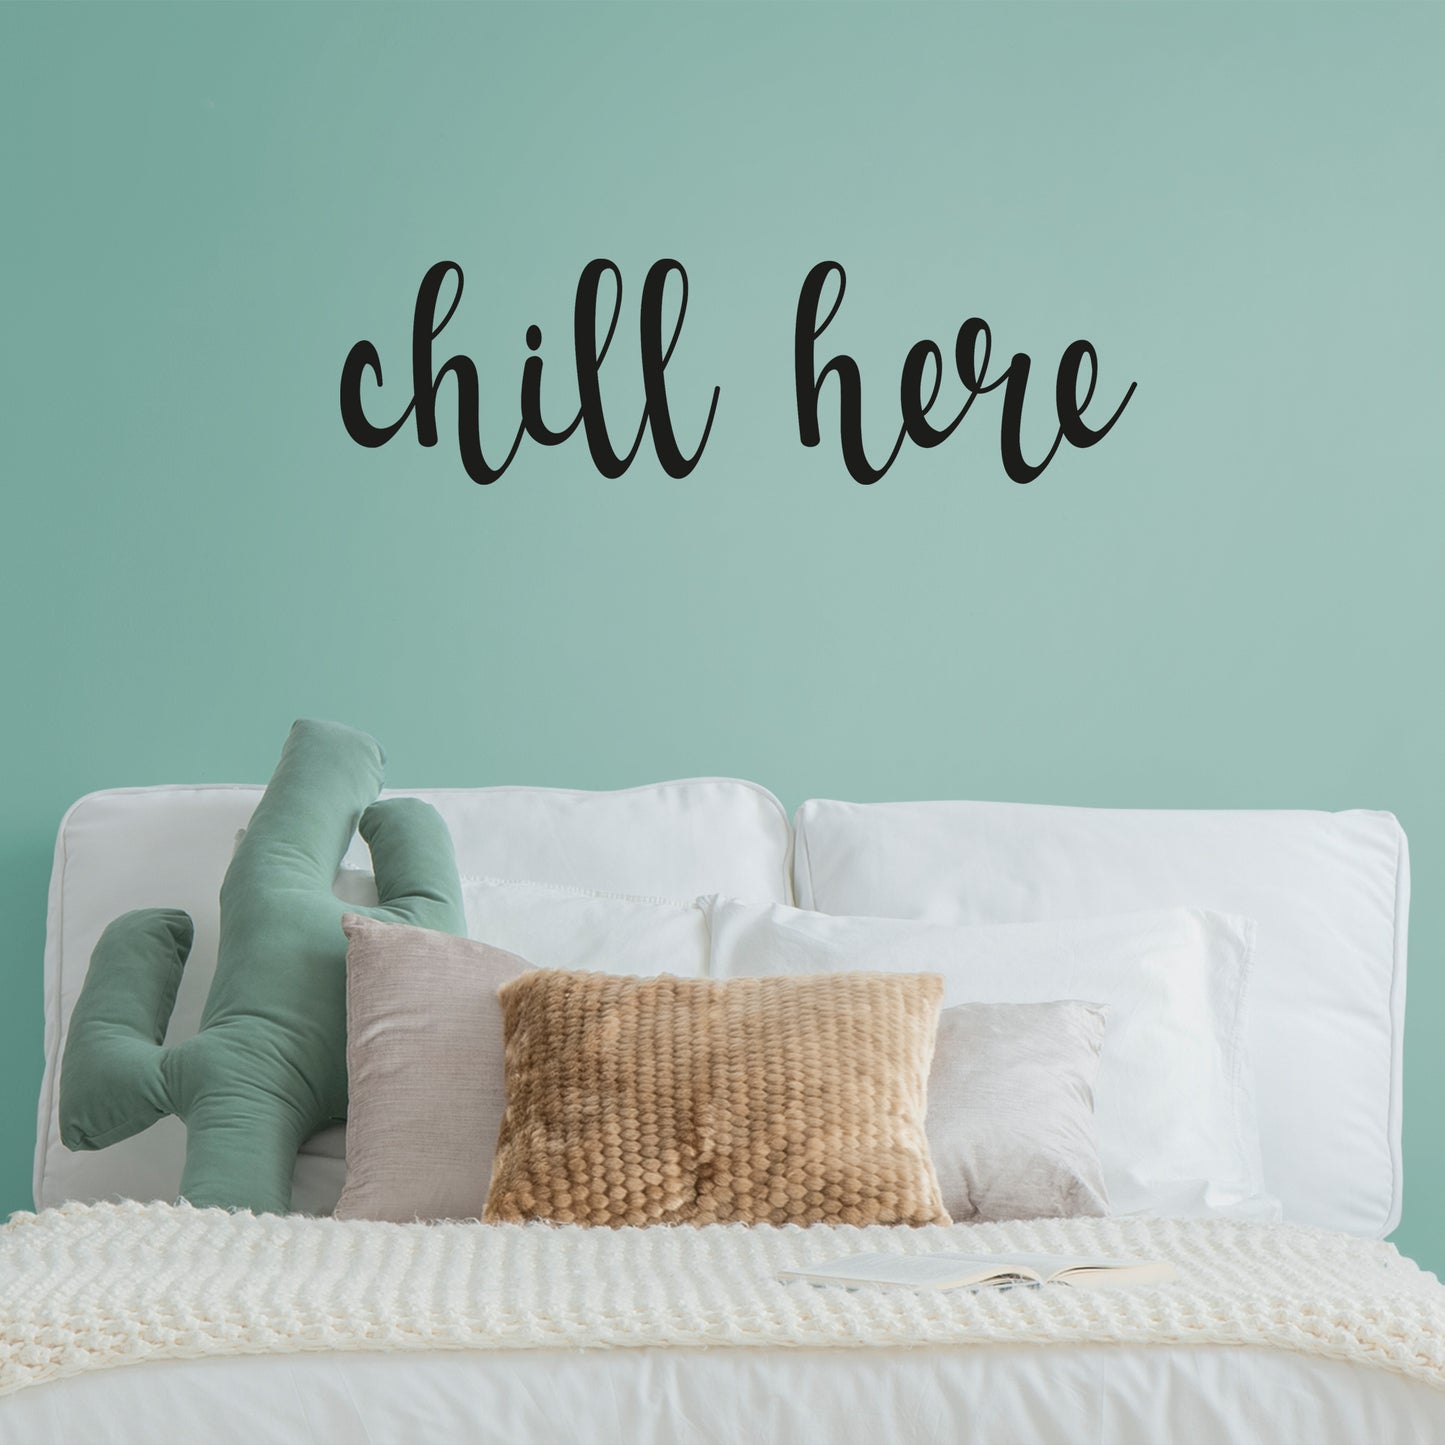 Pre-mask Chill Here  - Removable Wall Decal